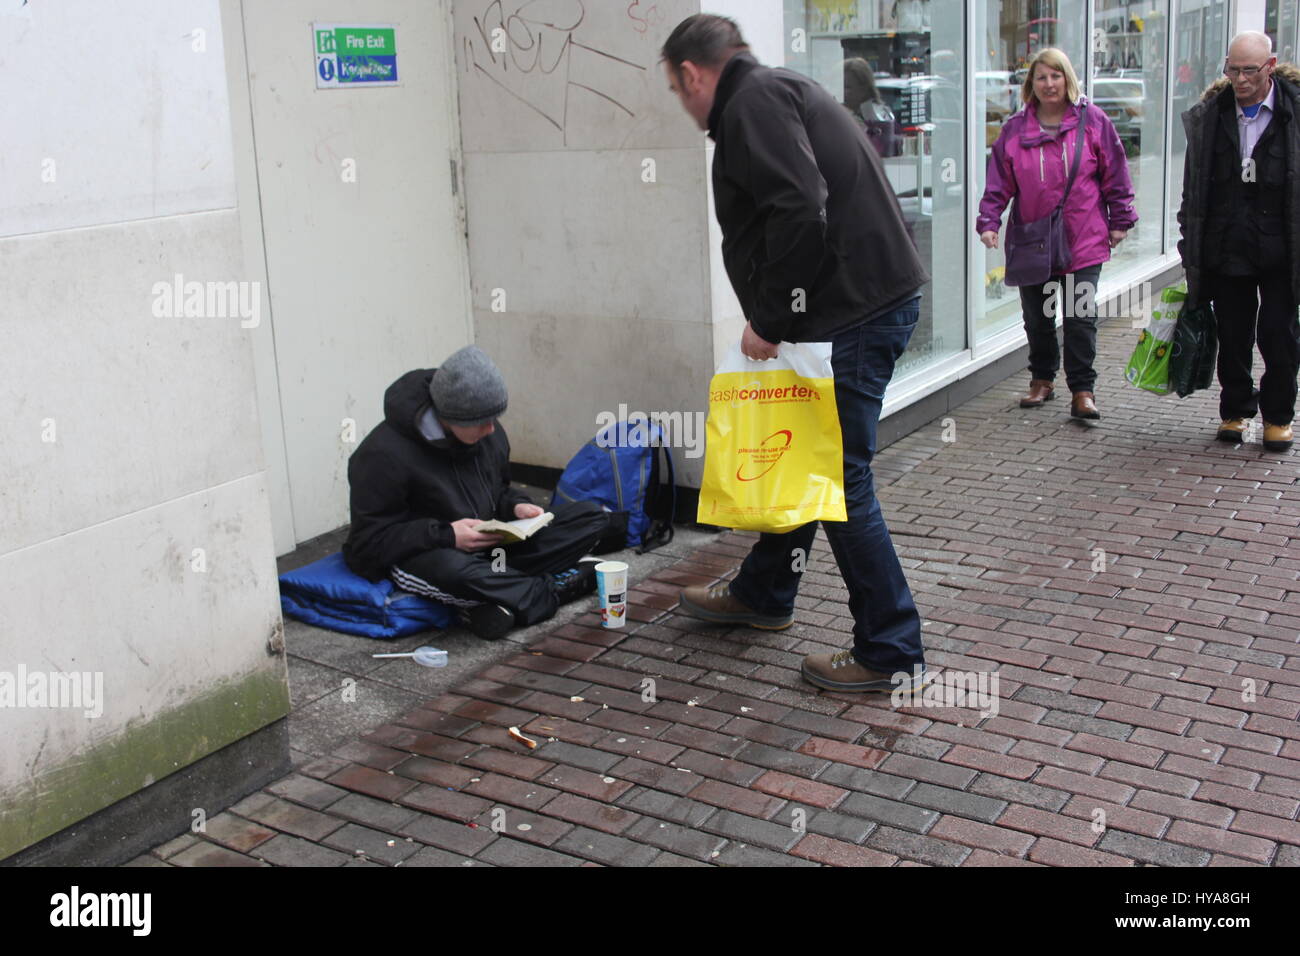 Images were taken Saturday 1st April 2017 of homeless people in Belfast city centre. their were a lot more around but i chose 3 to start with.Saturday was very mild weather wise for a change with the start of spring.I am back at college studying and this is a topic    i have started in relation to coursework I believe this is a subject that needs more attention,More funding and less judgement. My dad always said the only time you should look down at someone is when you are helping them up. Stock Photo